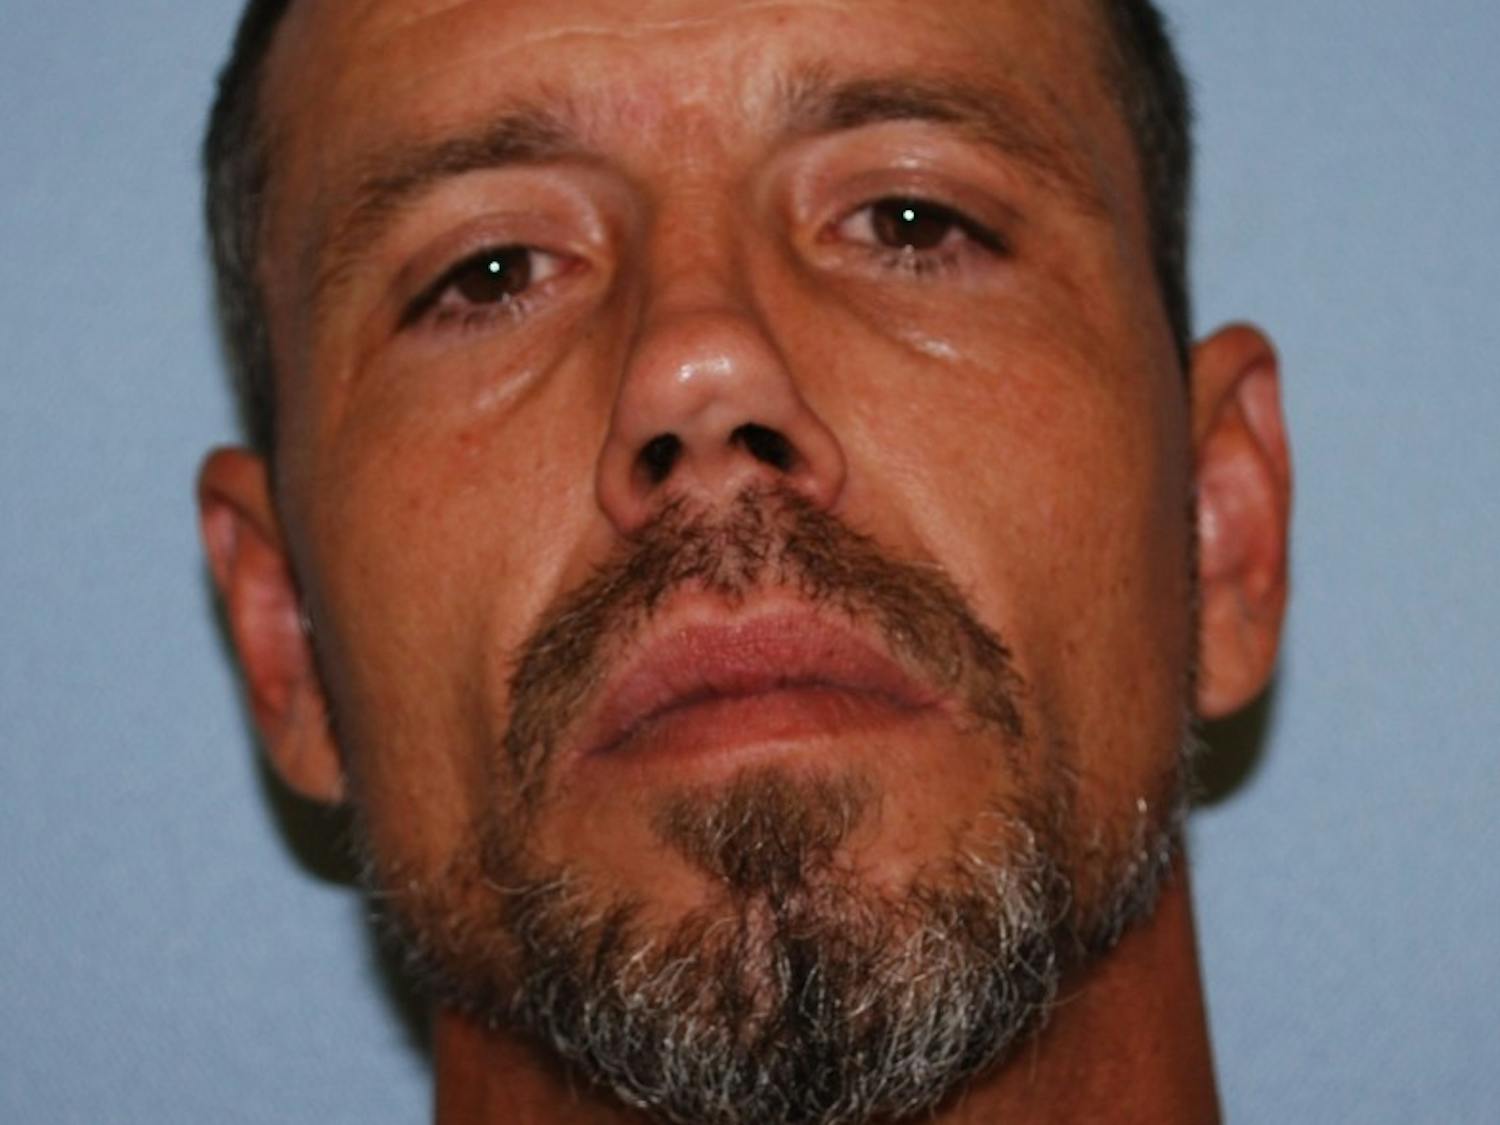 The Auburn Police Division on Wednesday arrested James F. Romine, a 38-year-old from Auburn, charging him with third-degree burglary, first-degree theft of property and resisting arrest.